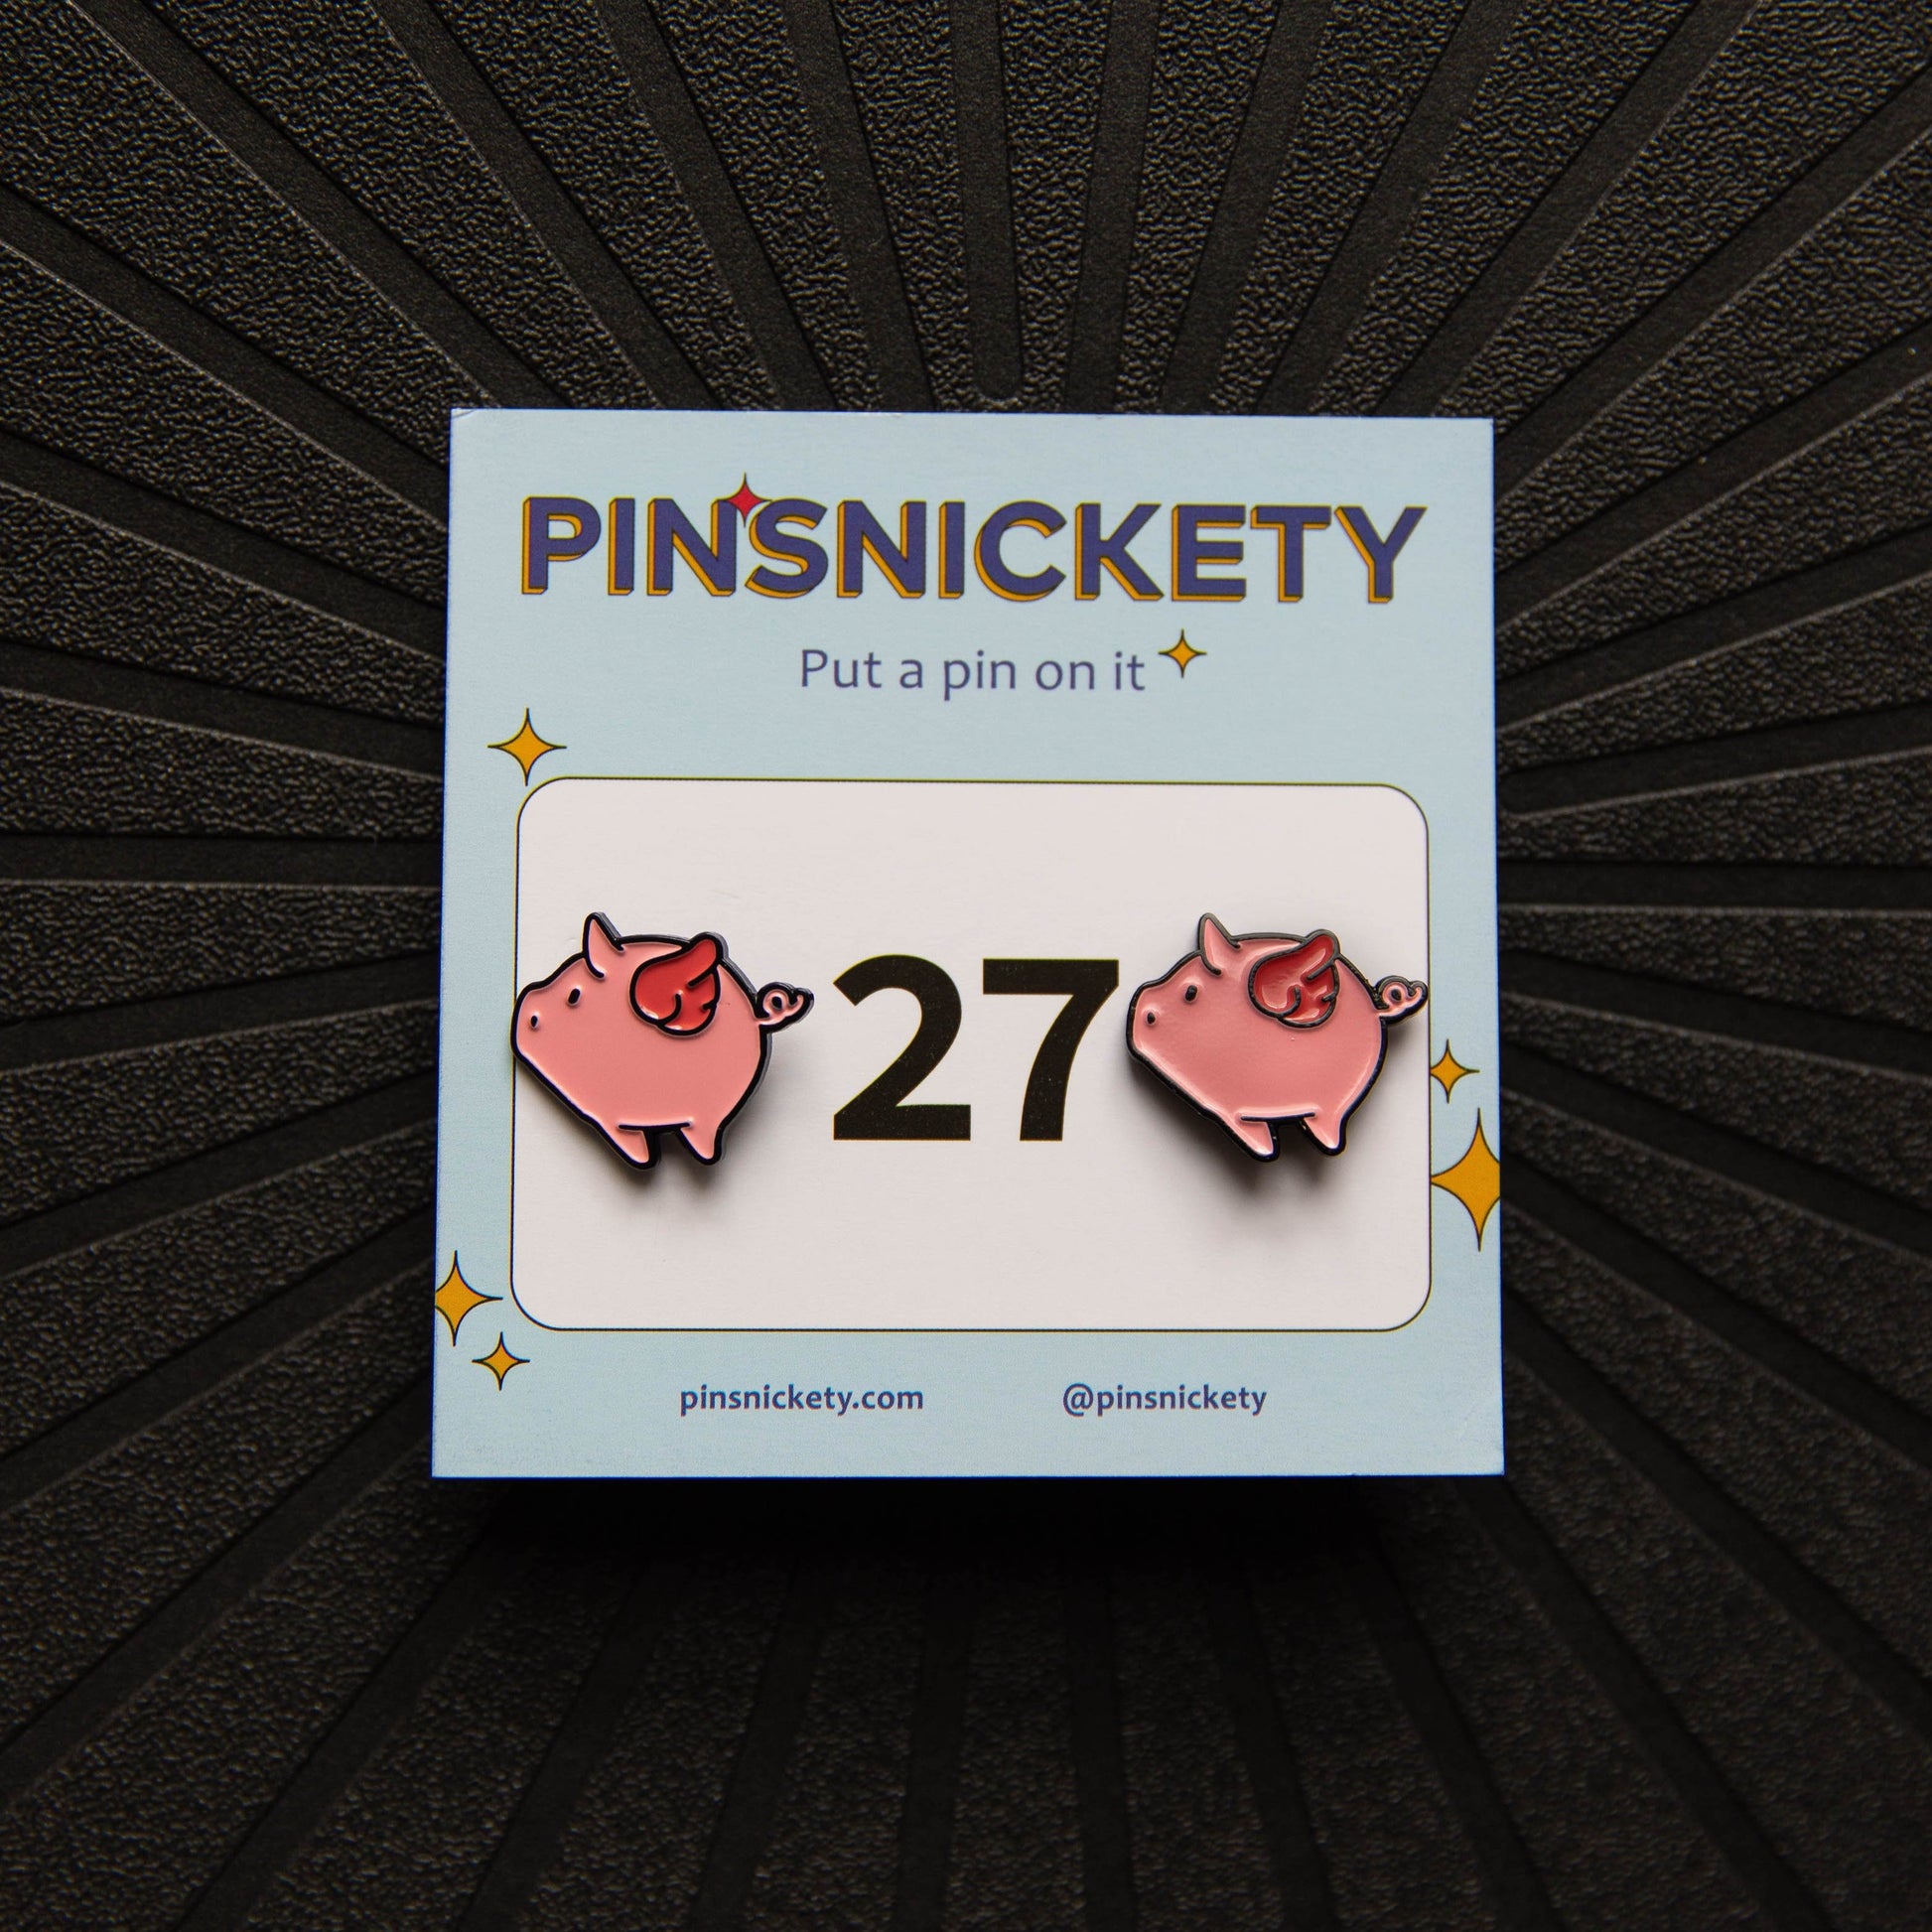 Pinsnickety Flying Pig horse show number pins on their product packaging card